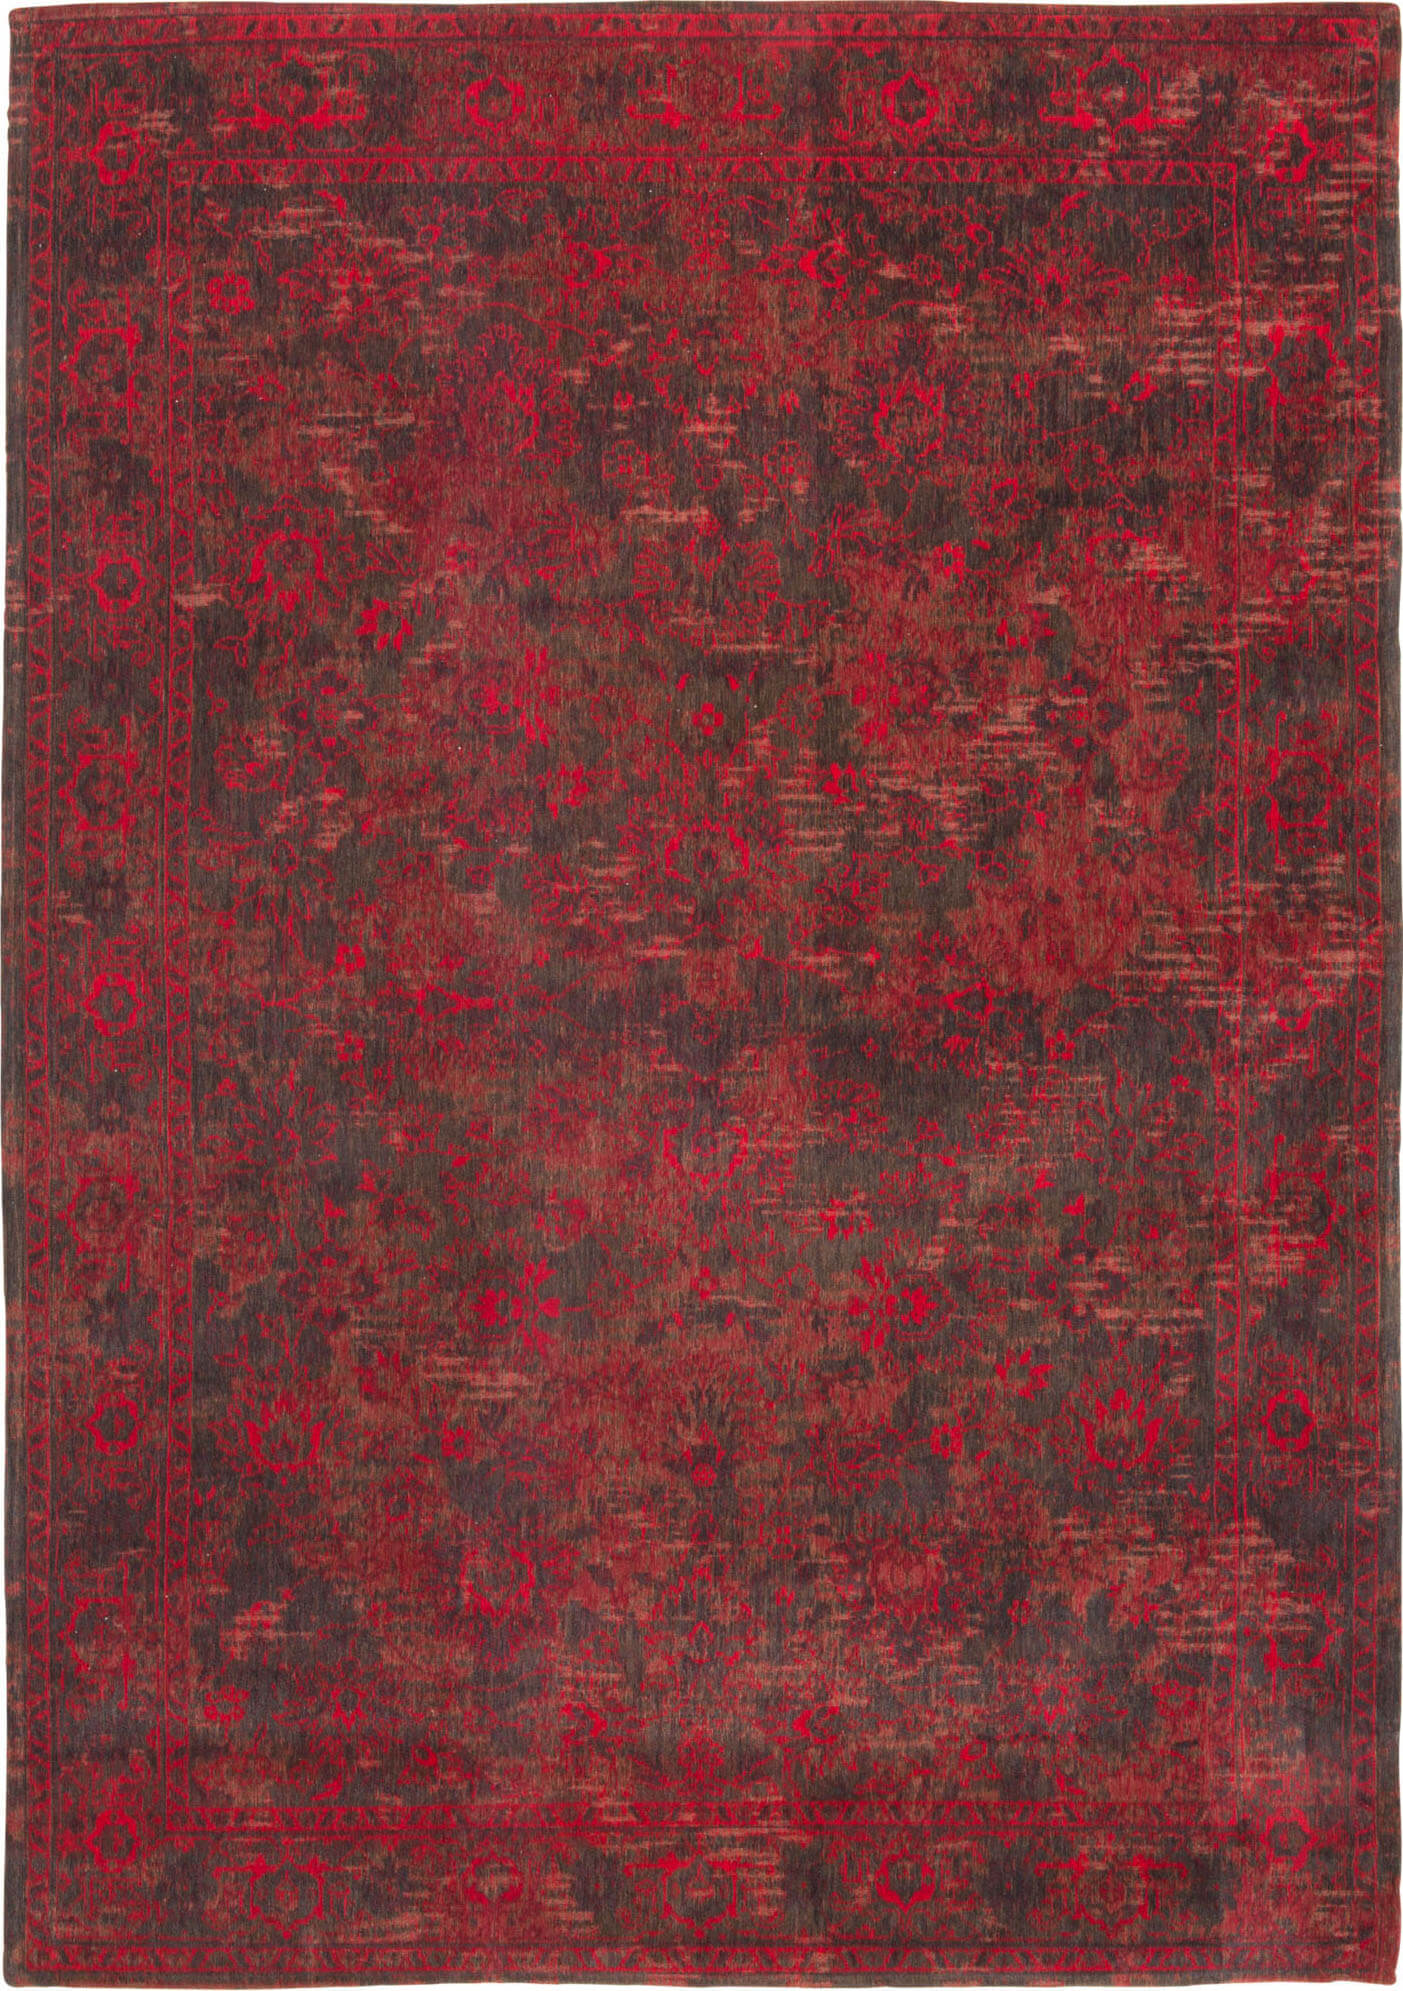 Grey Red Bright Persian Vintage Rug ☞ Size: 80 x 150 cm